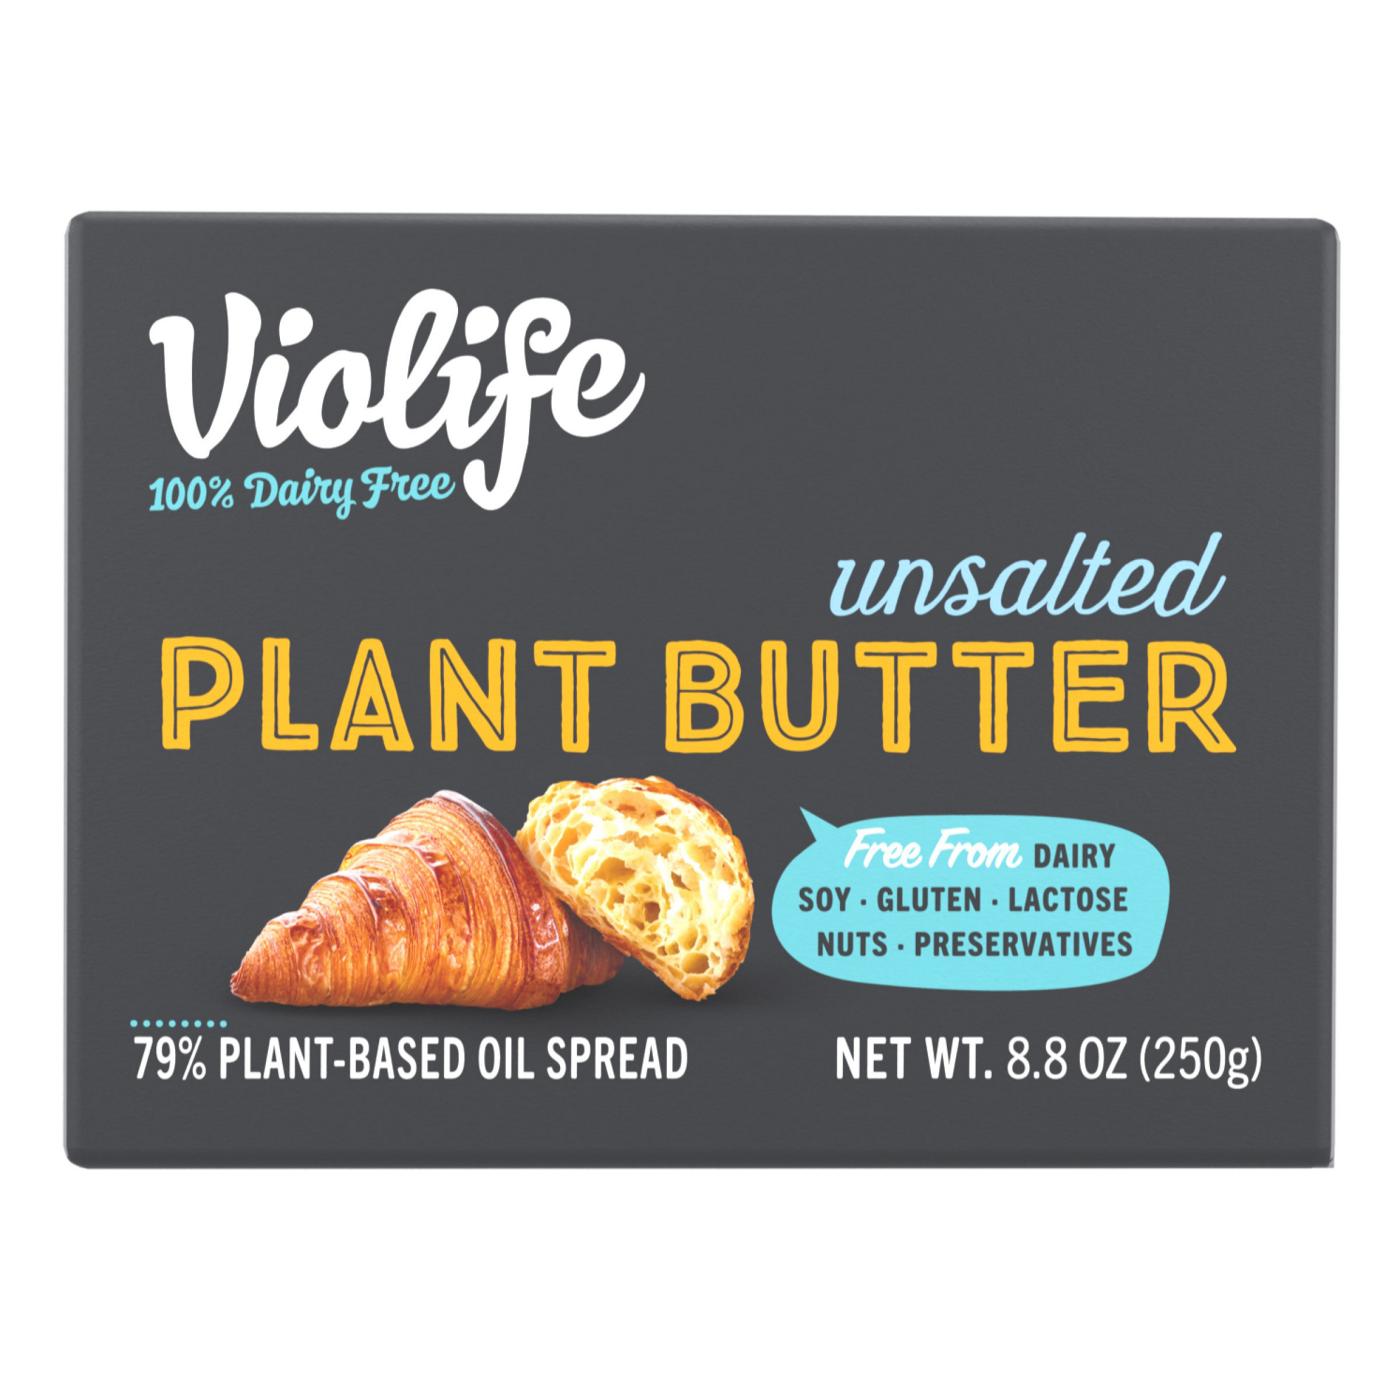 Violife Plant Butter Unsalted Dairy-Free Vegan; image 1 of 10